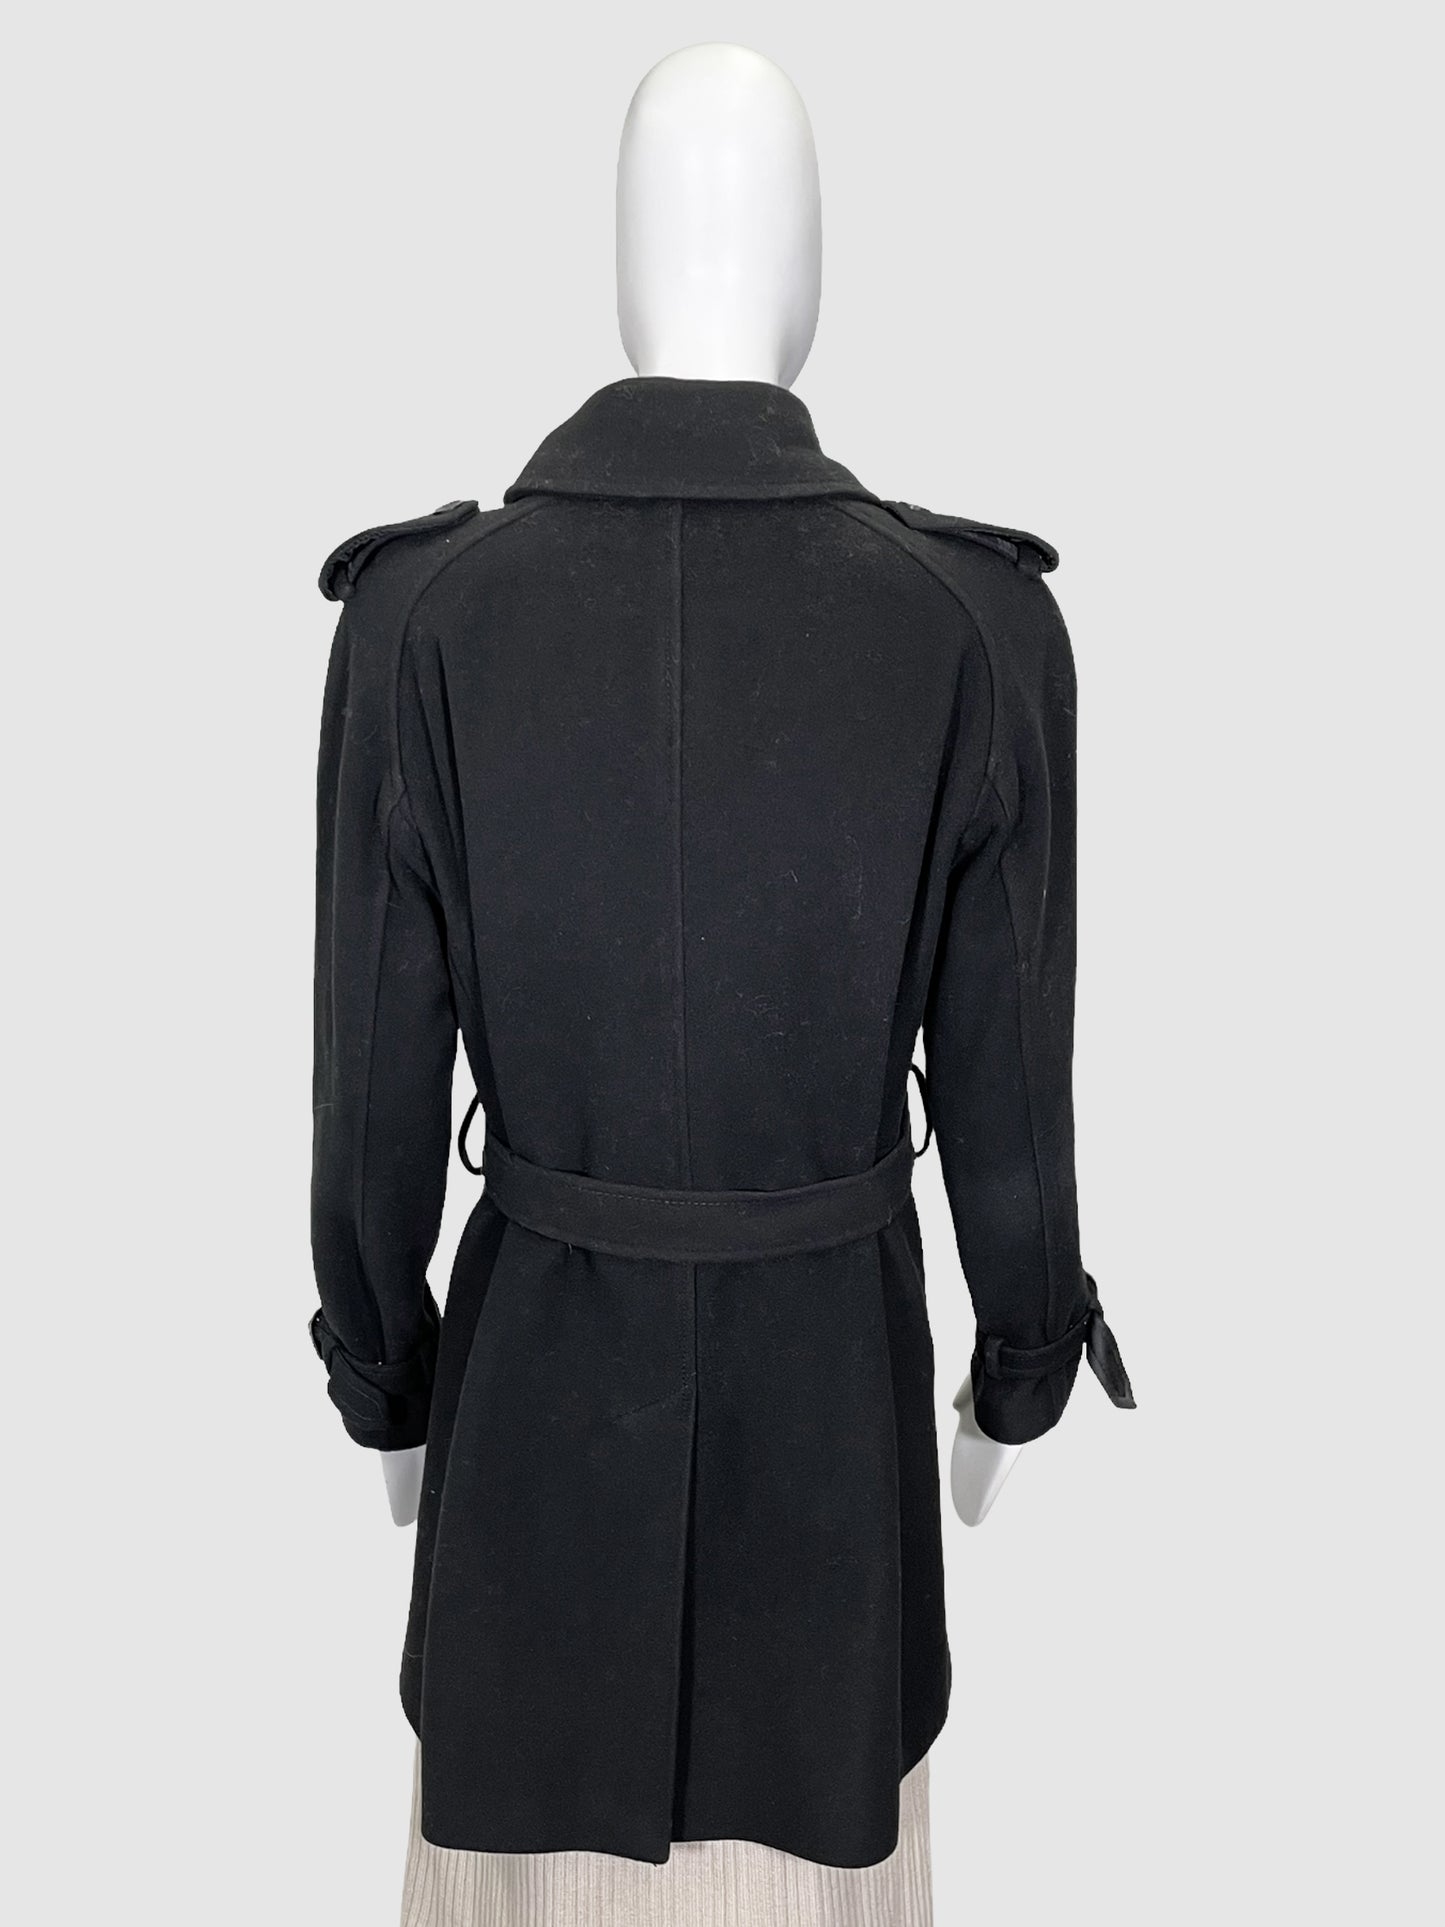 Burberry Wool Double-Breasted Coat - Size 10